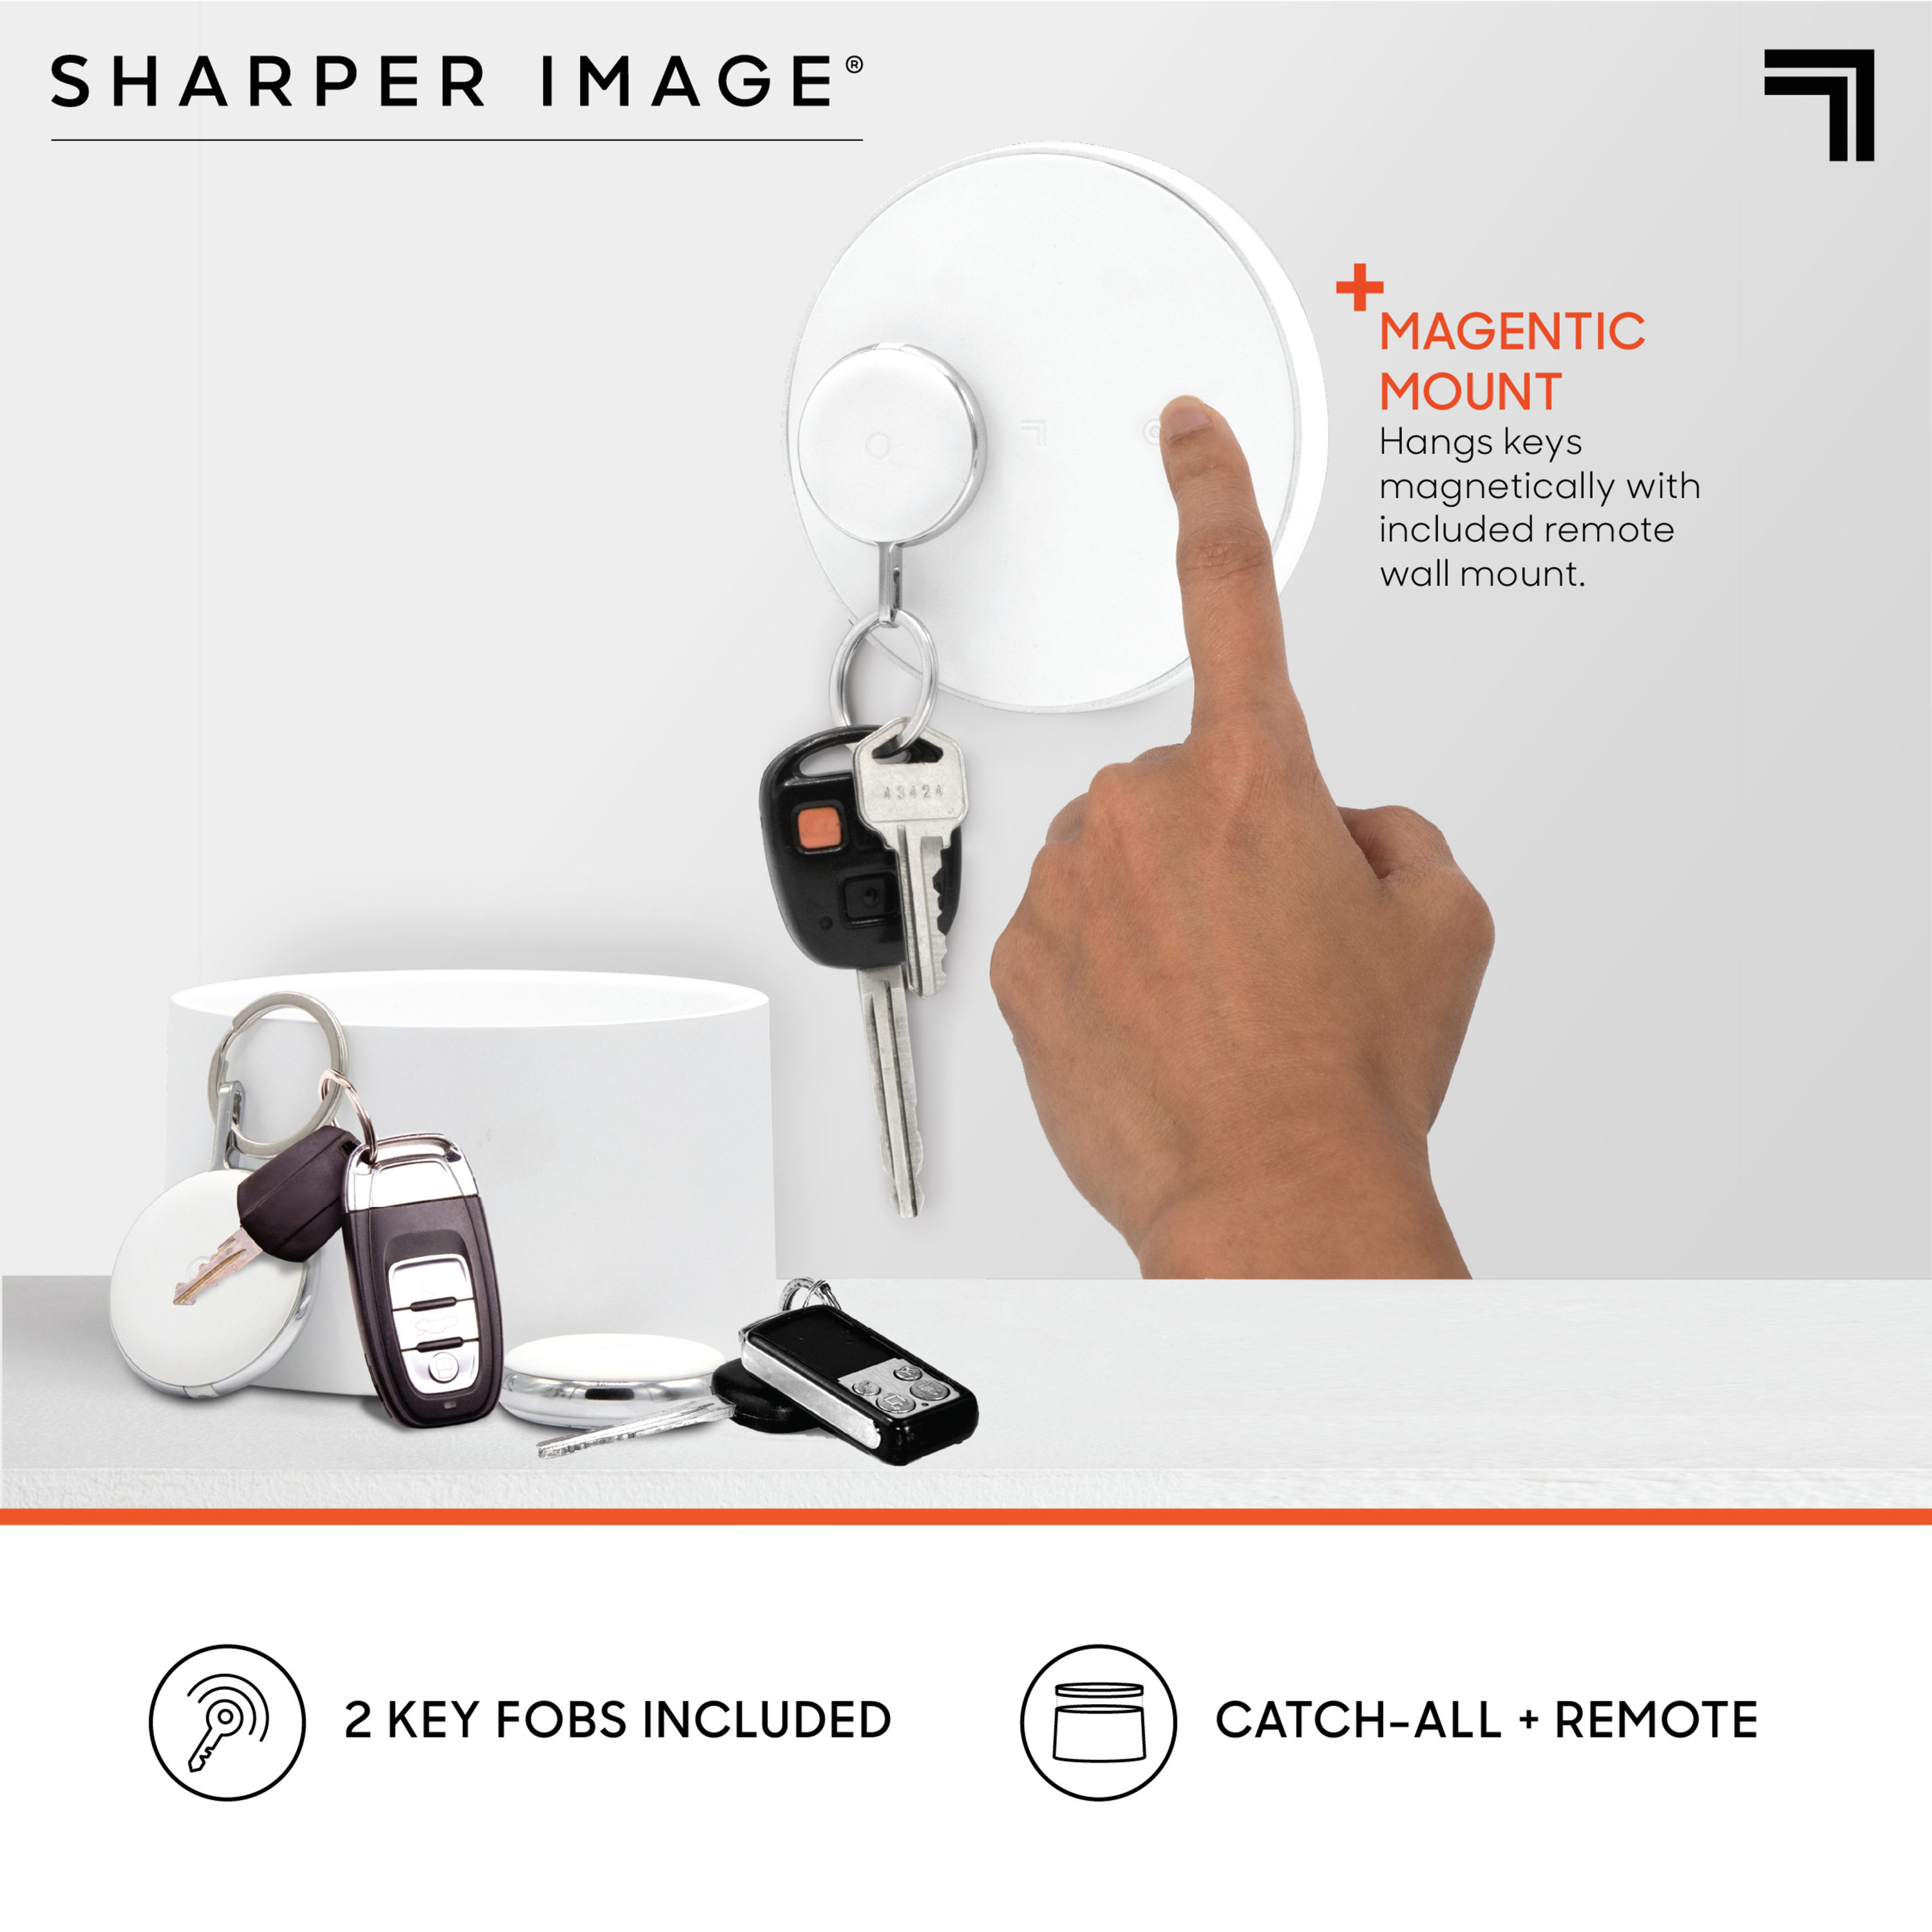 Sharper Image Smart Track Key Finder and Storage in the Security Alarm  Accessories department at Lowes.com